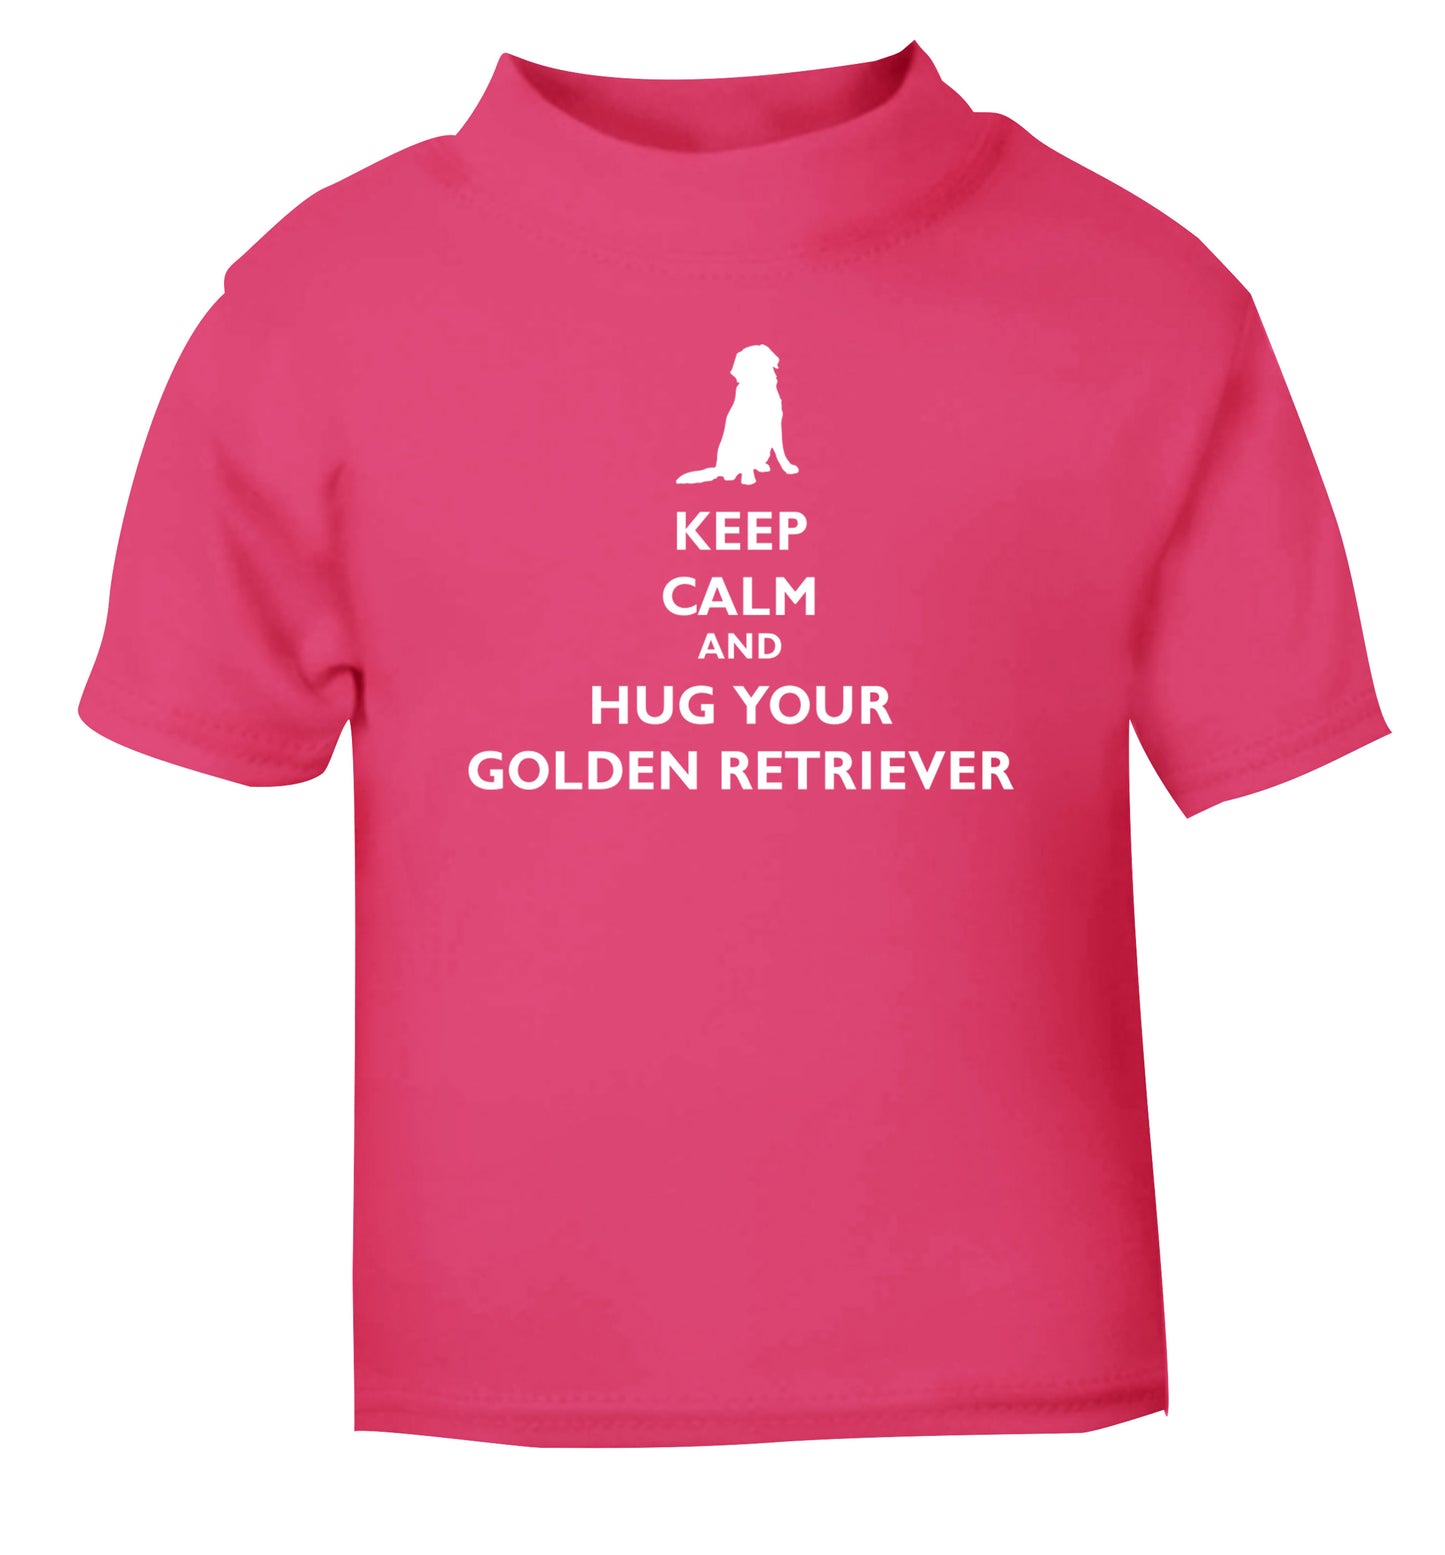 Keep calm and hug your golden retriever pink Baby Toddler Tshirt 2 Years